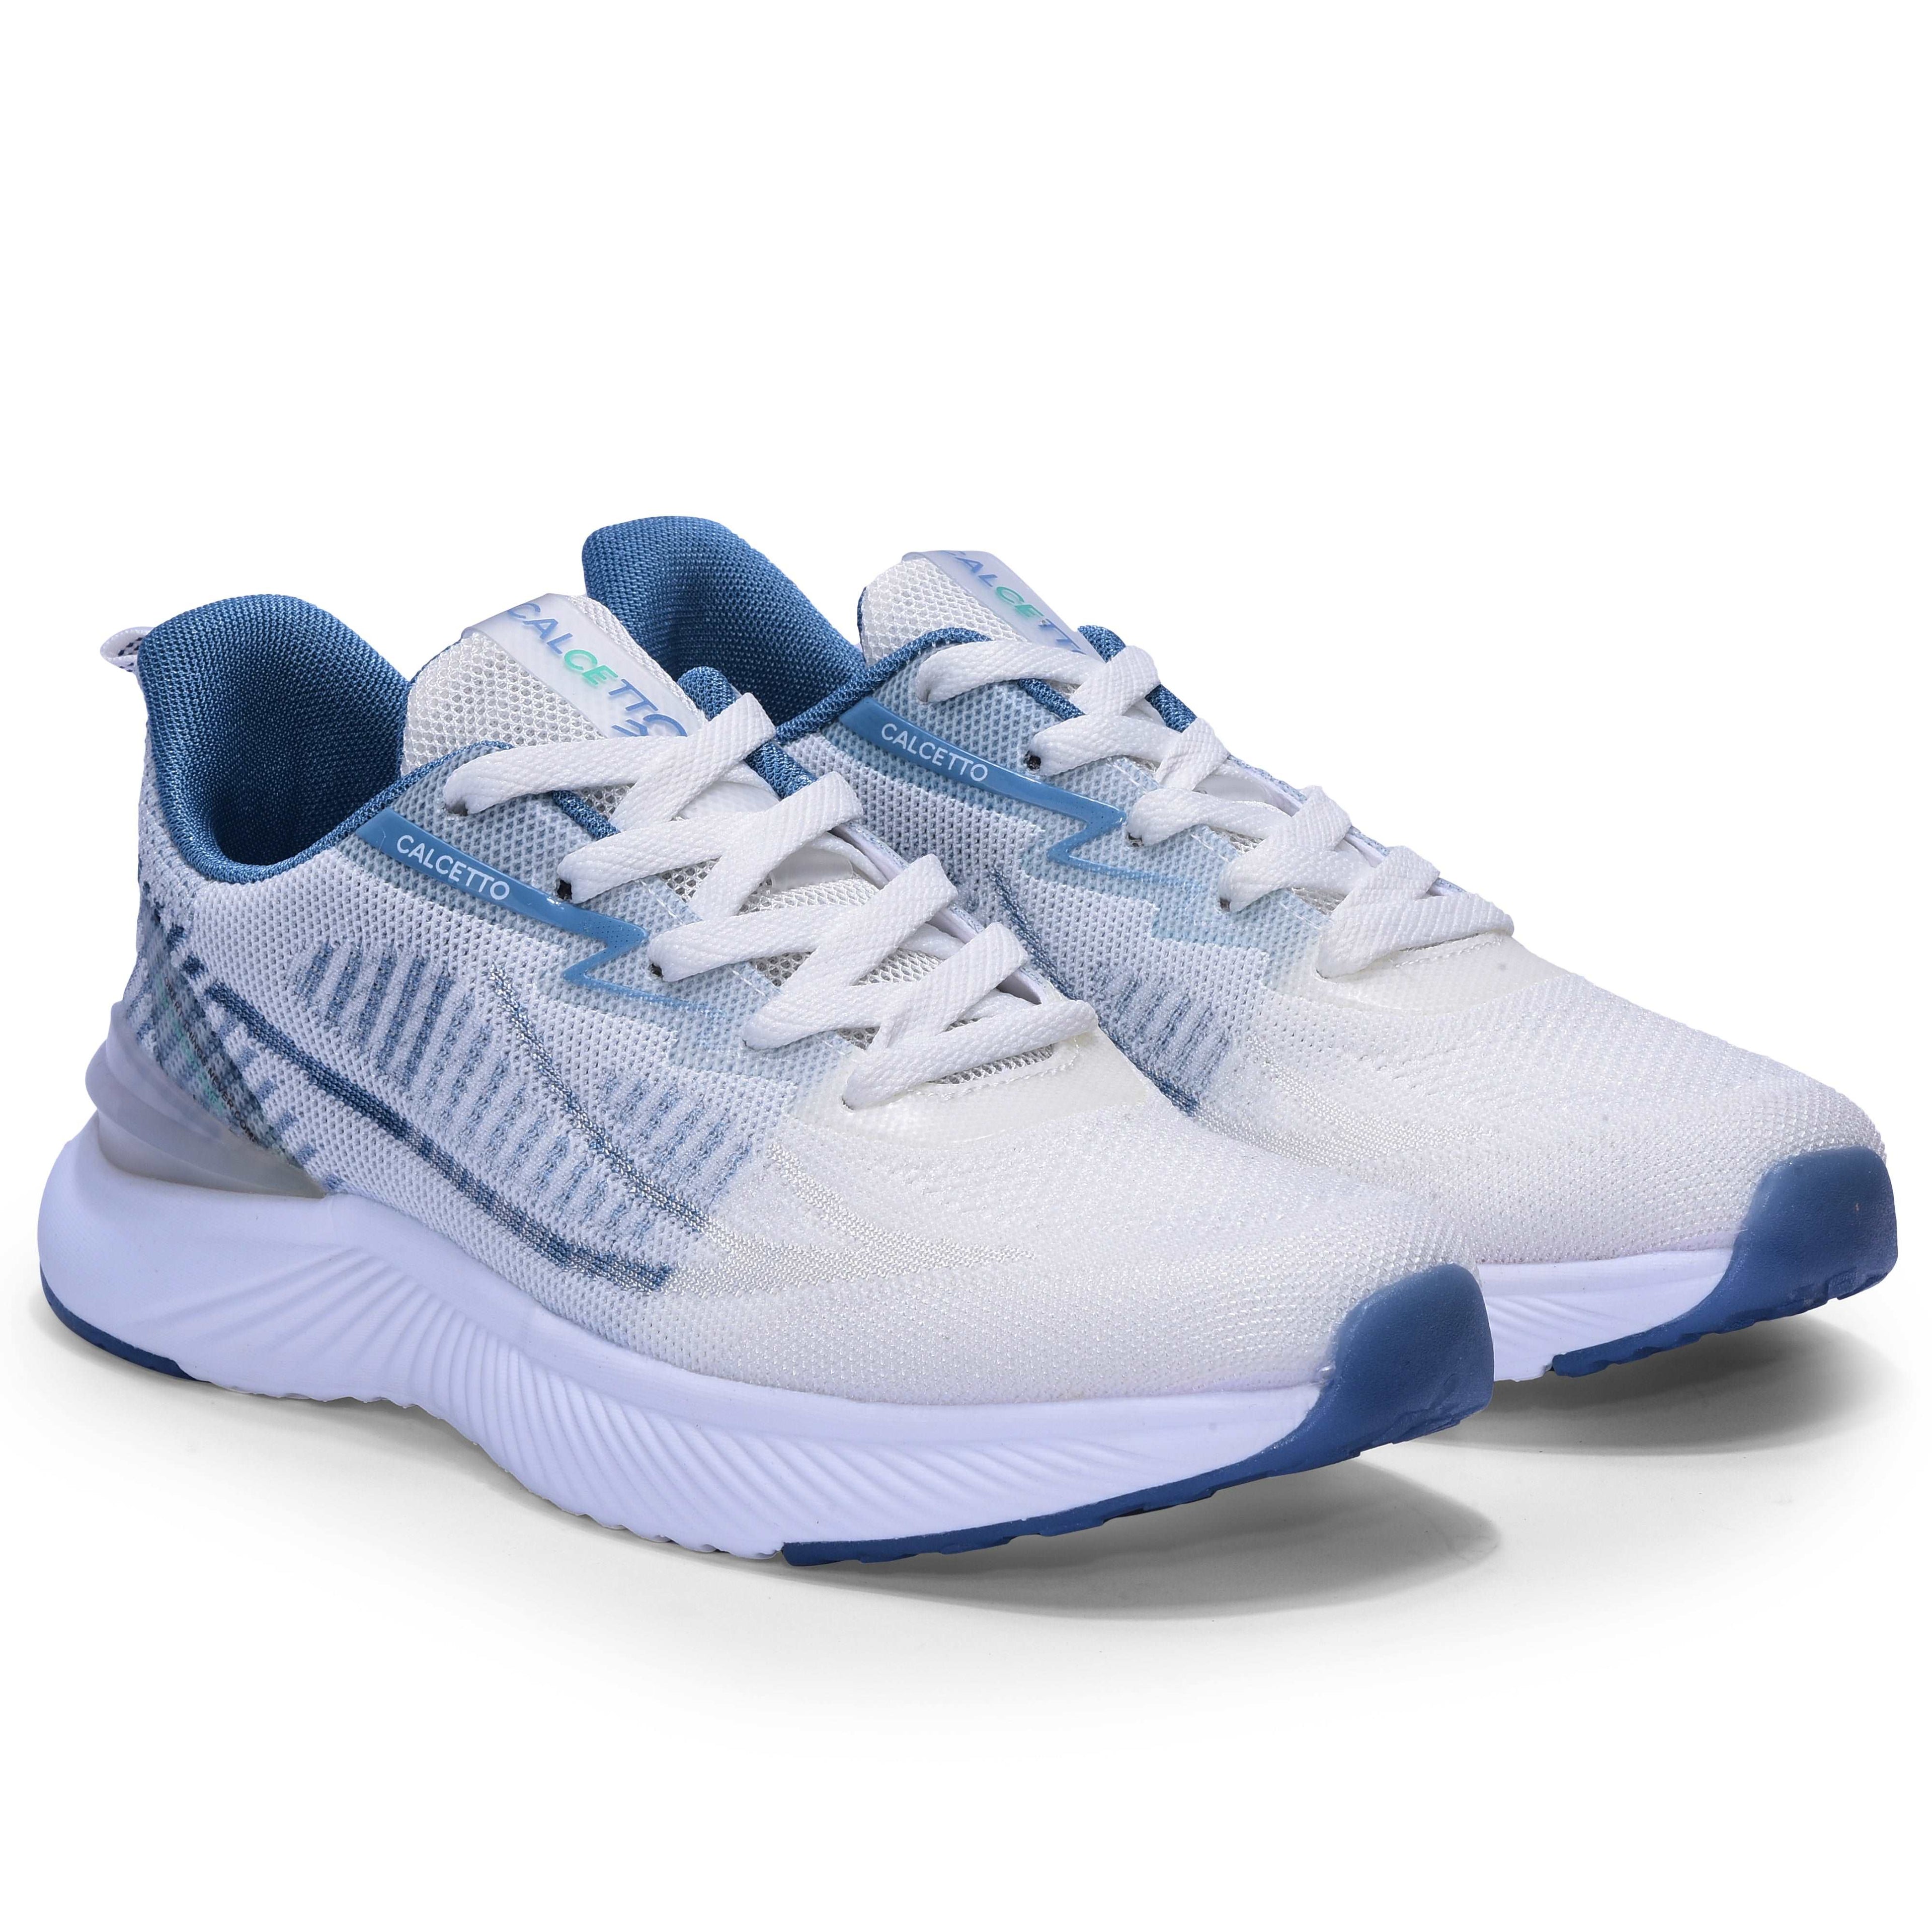 Calcetto CLT-0987 White Blue Running Sports Shoe For Men